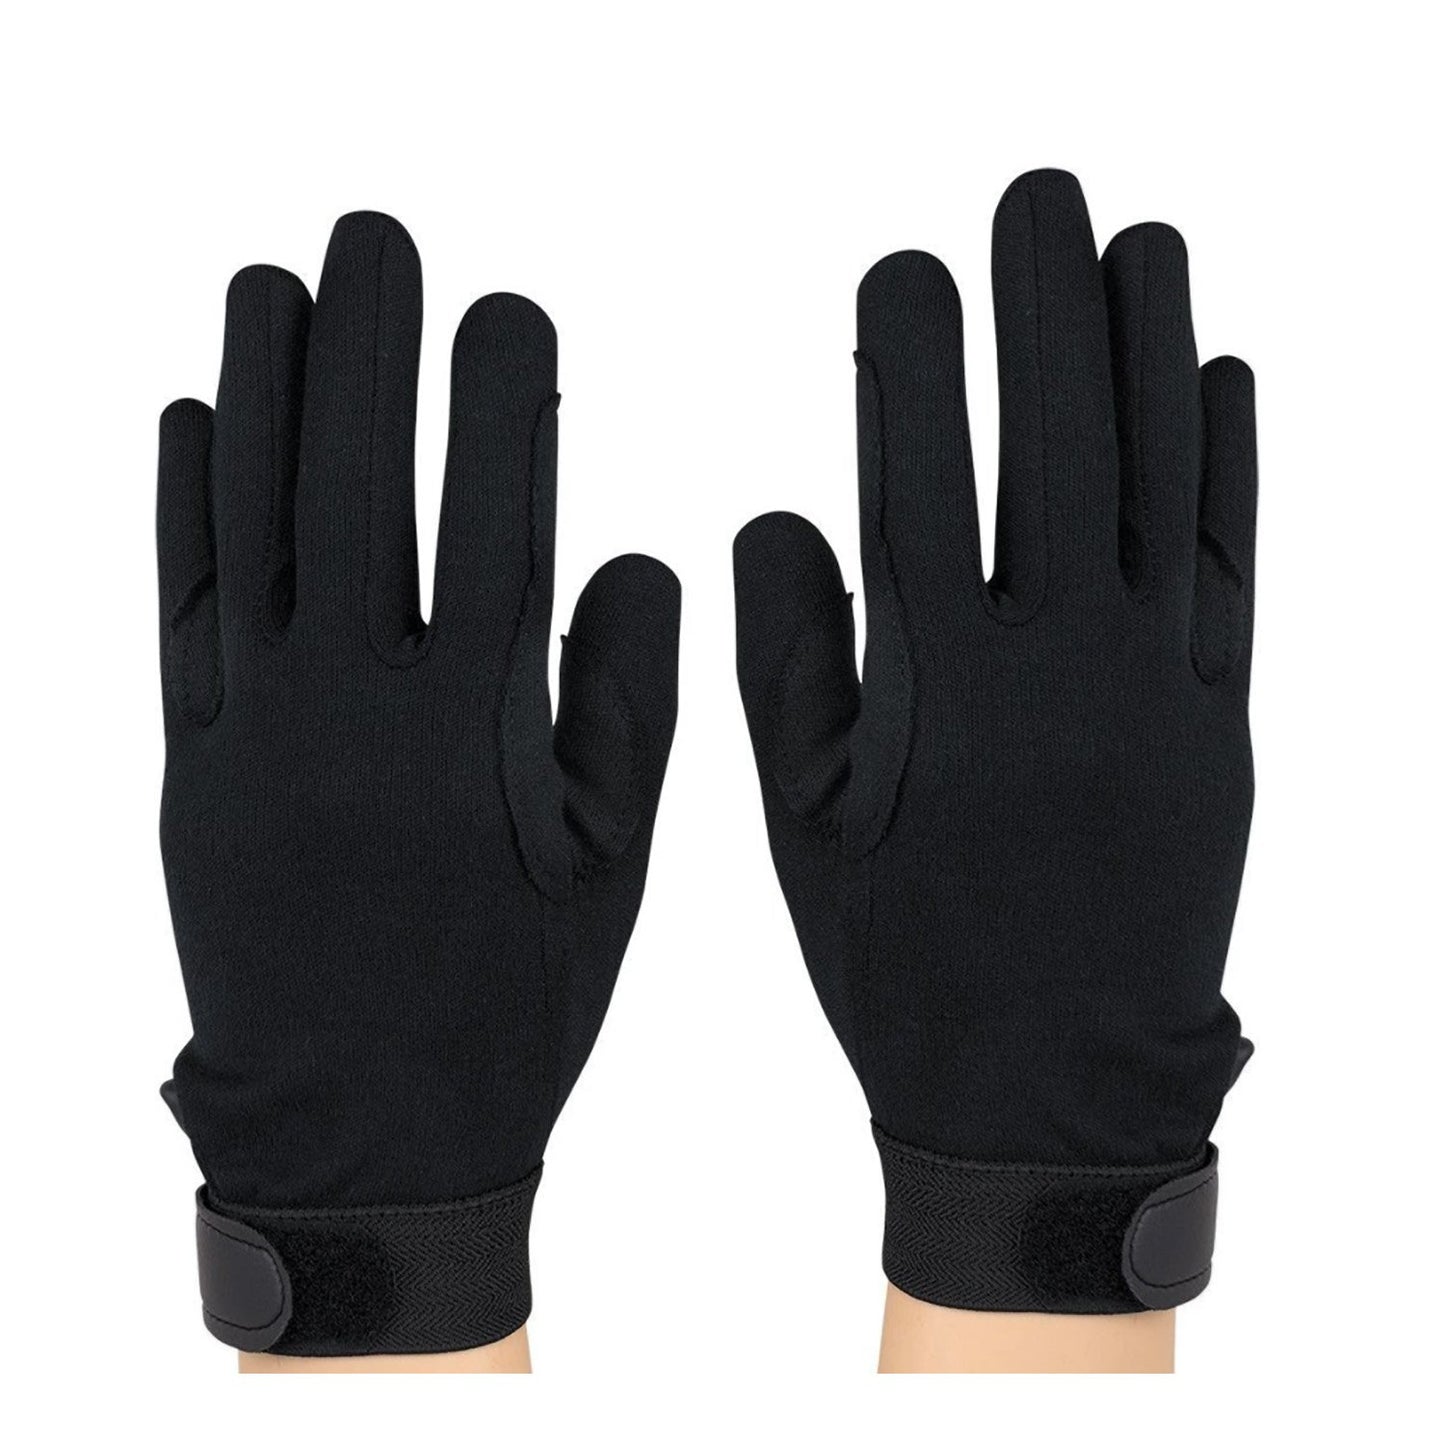 StylePlus Deluxe Cotton Military Gloves